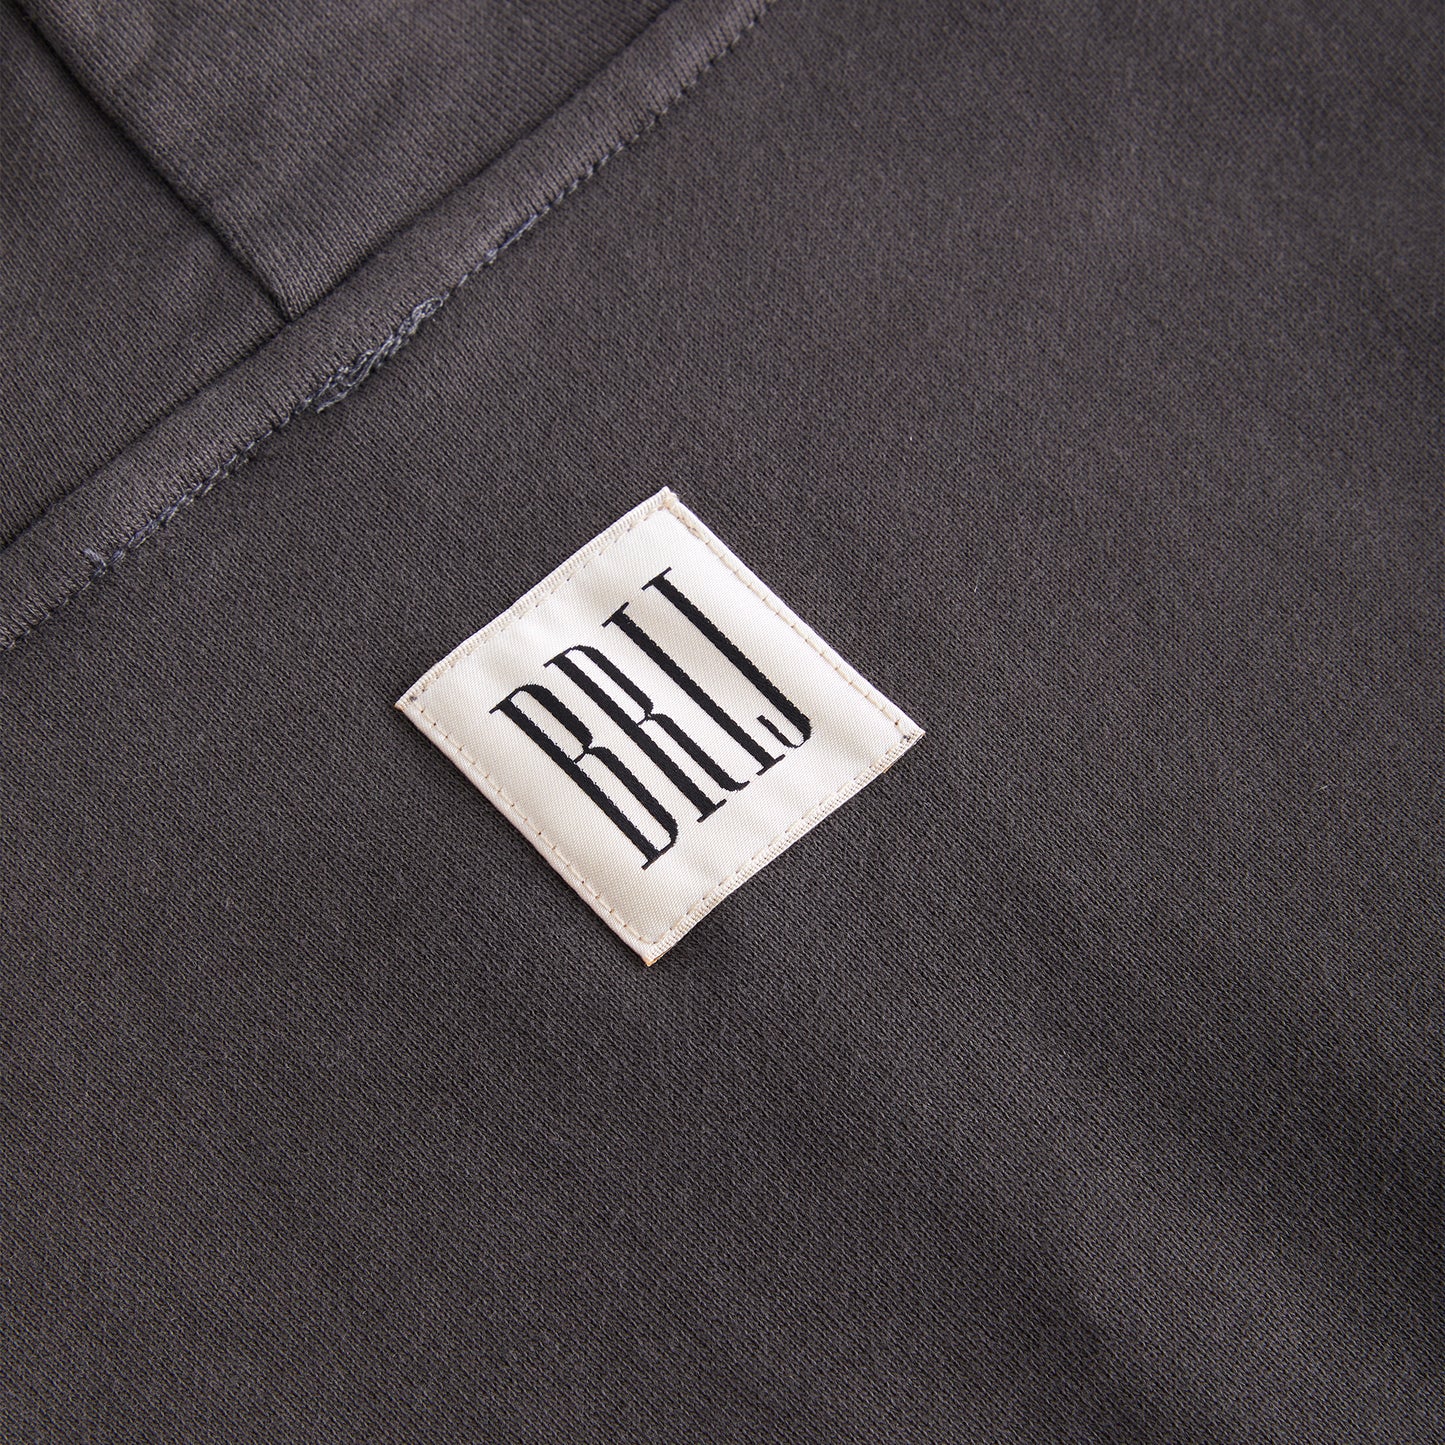 Product 0010 - The Everyday Hoodie (Charcoal)